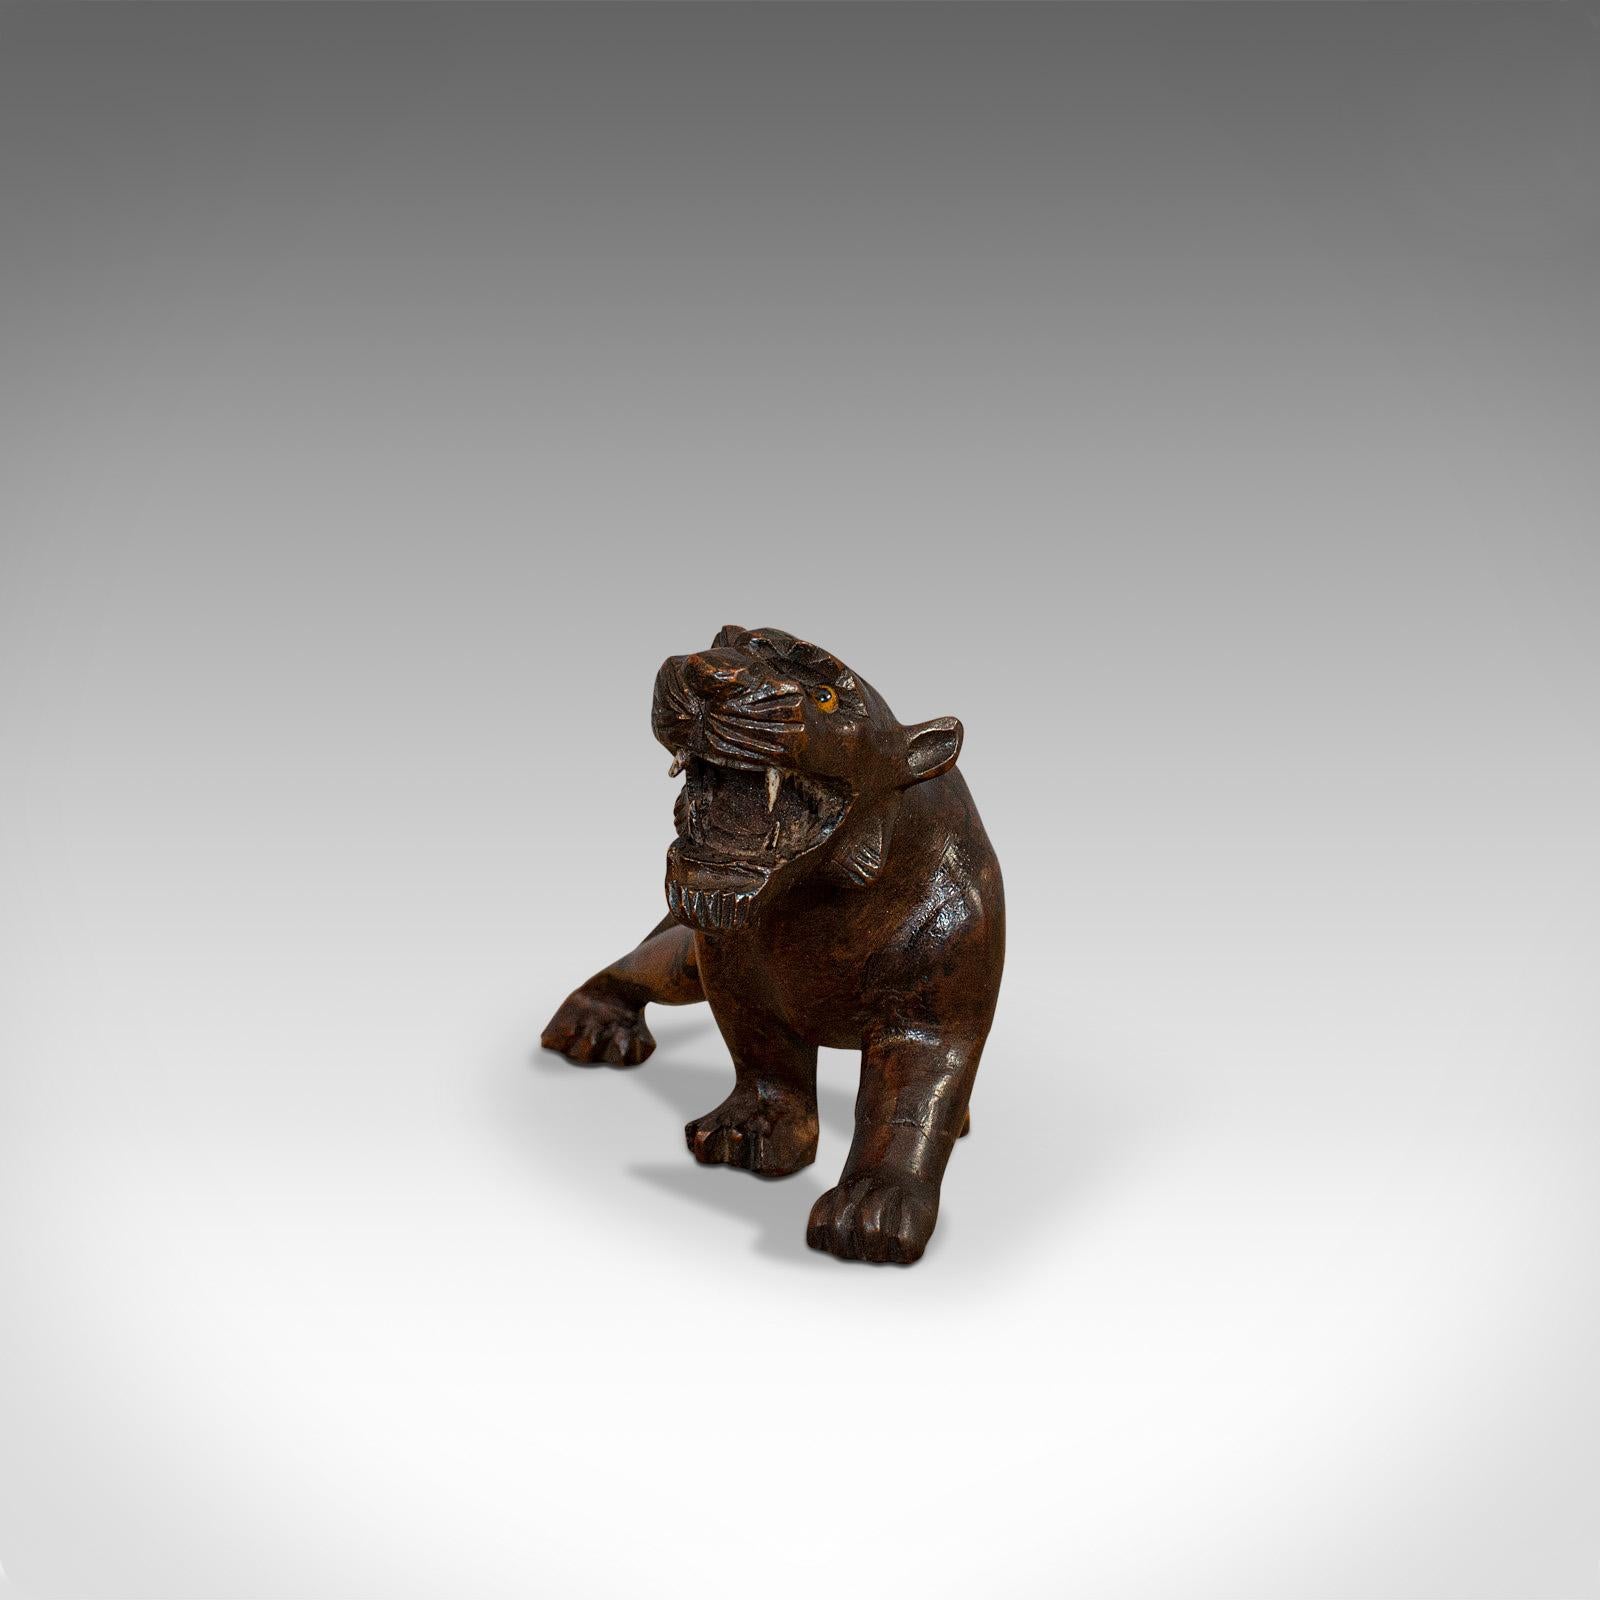 This is an antique carved tiger. An Asian, solid teak and bone decorative statue, dating to the early 20th century, circa 1920.

A prowling, handcrafted Panthera tigris
Displays a desirable aged patina
Skilfully carved solid teak captures the